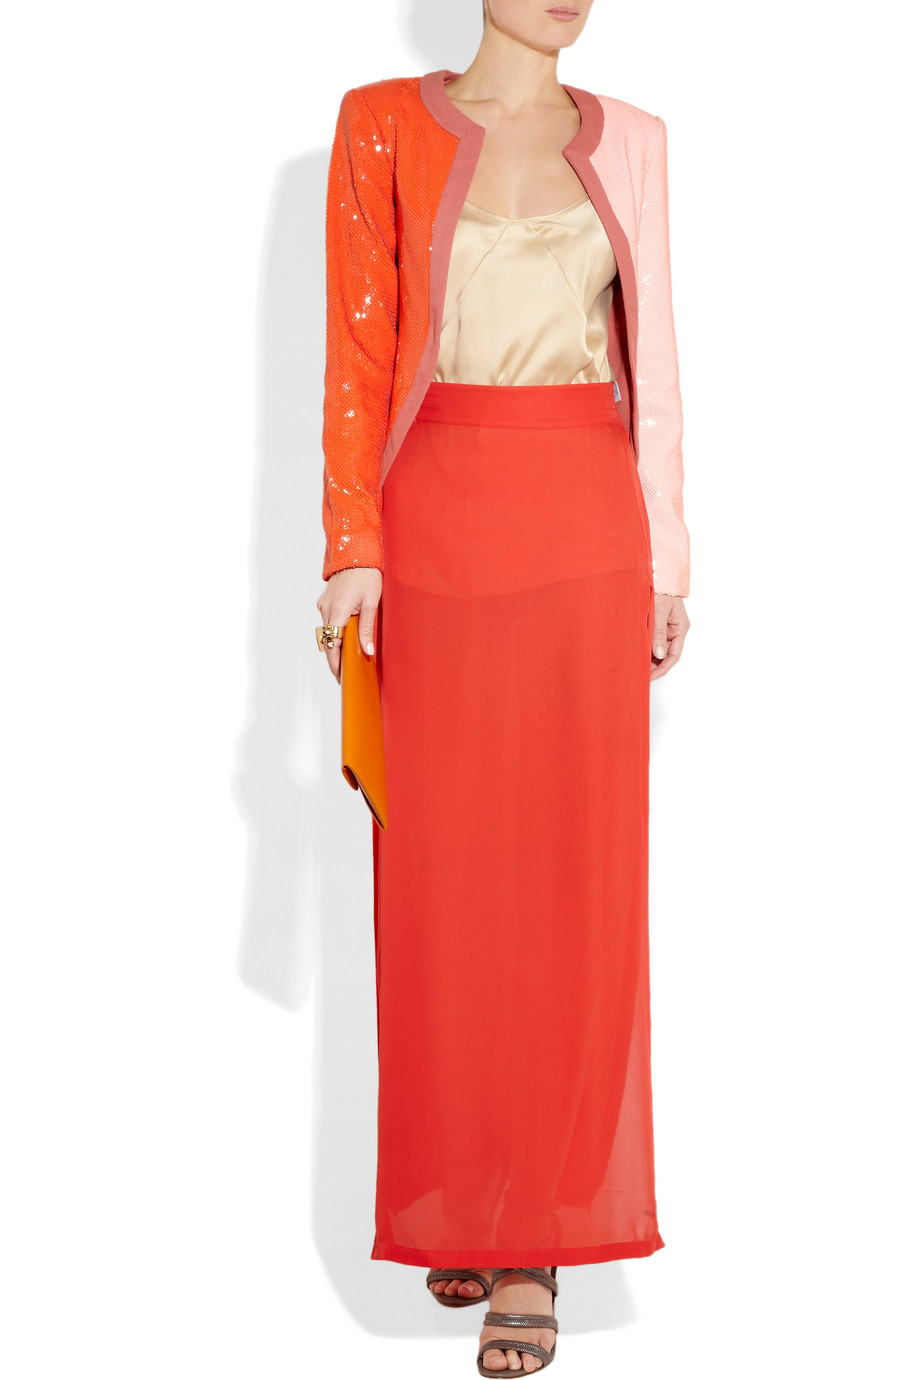 Lyst - Sass & bide Times Like This Sequined Jacket in Orange